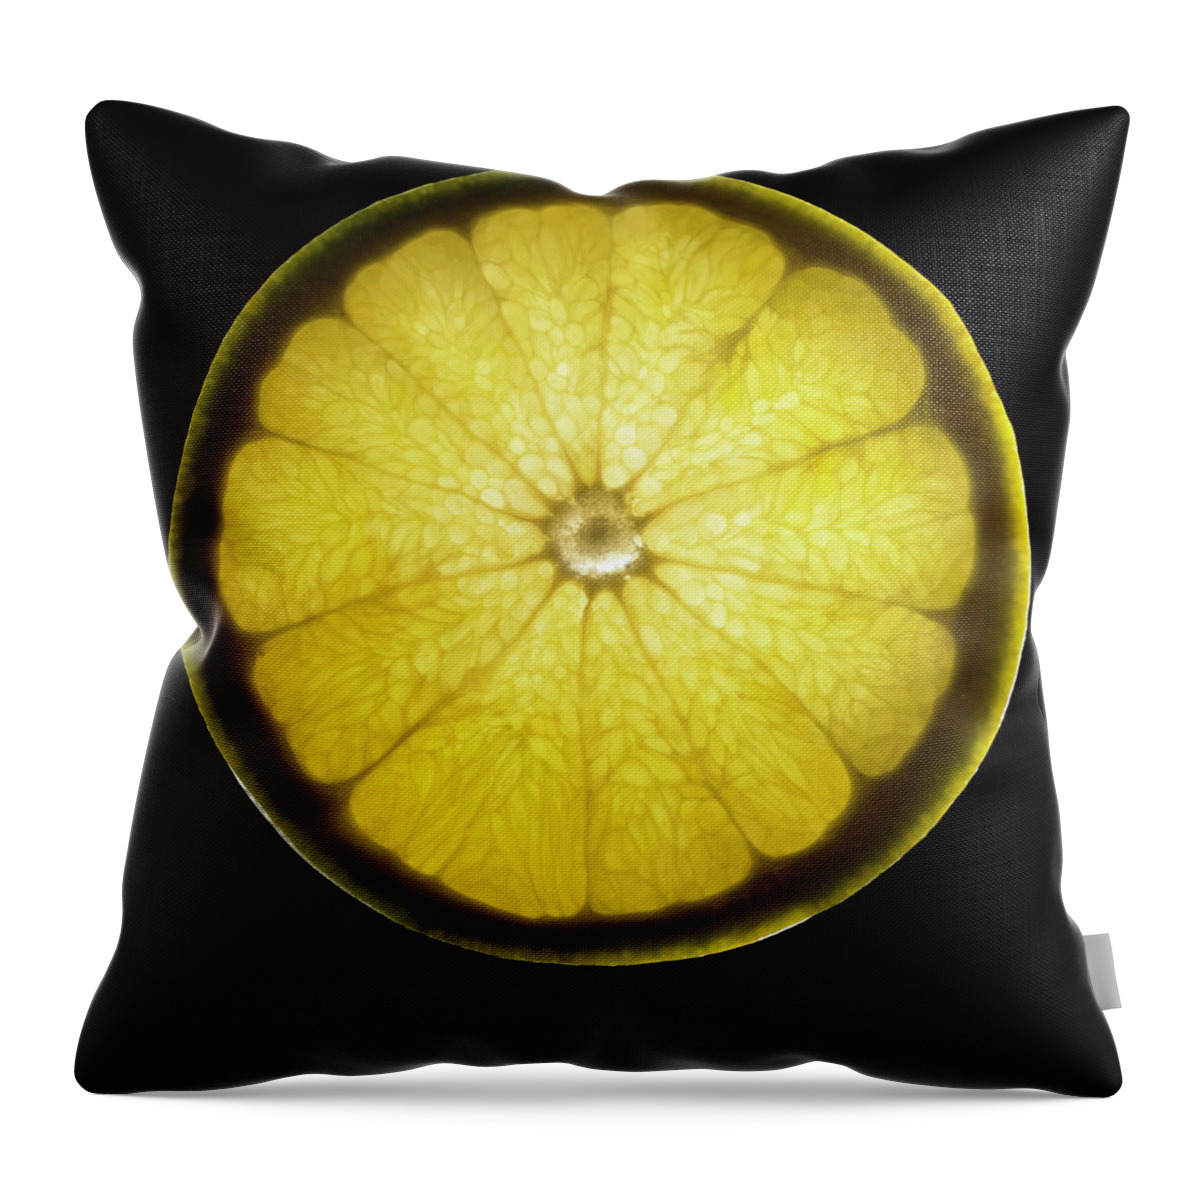 California Throw Pillow featuring the photograph Organic Grapefruit by Monica Rodriguez